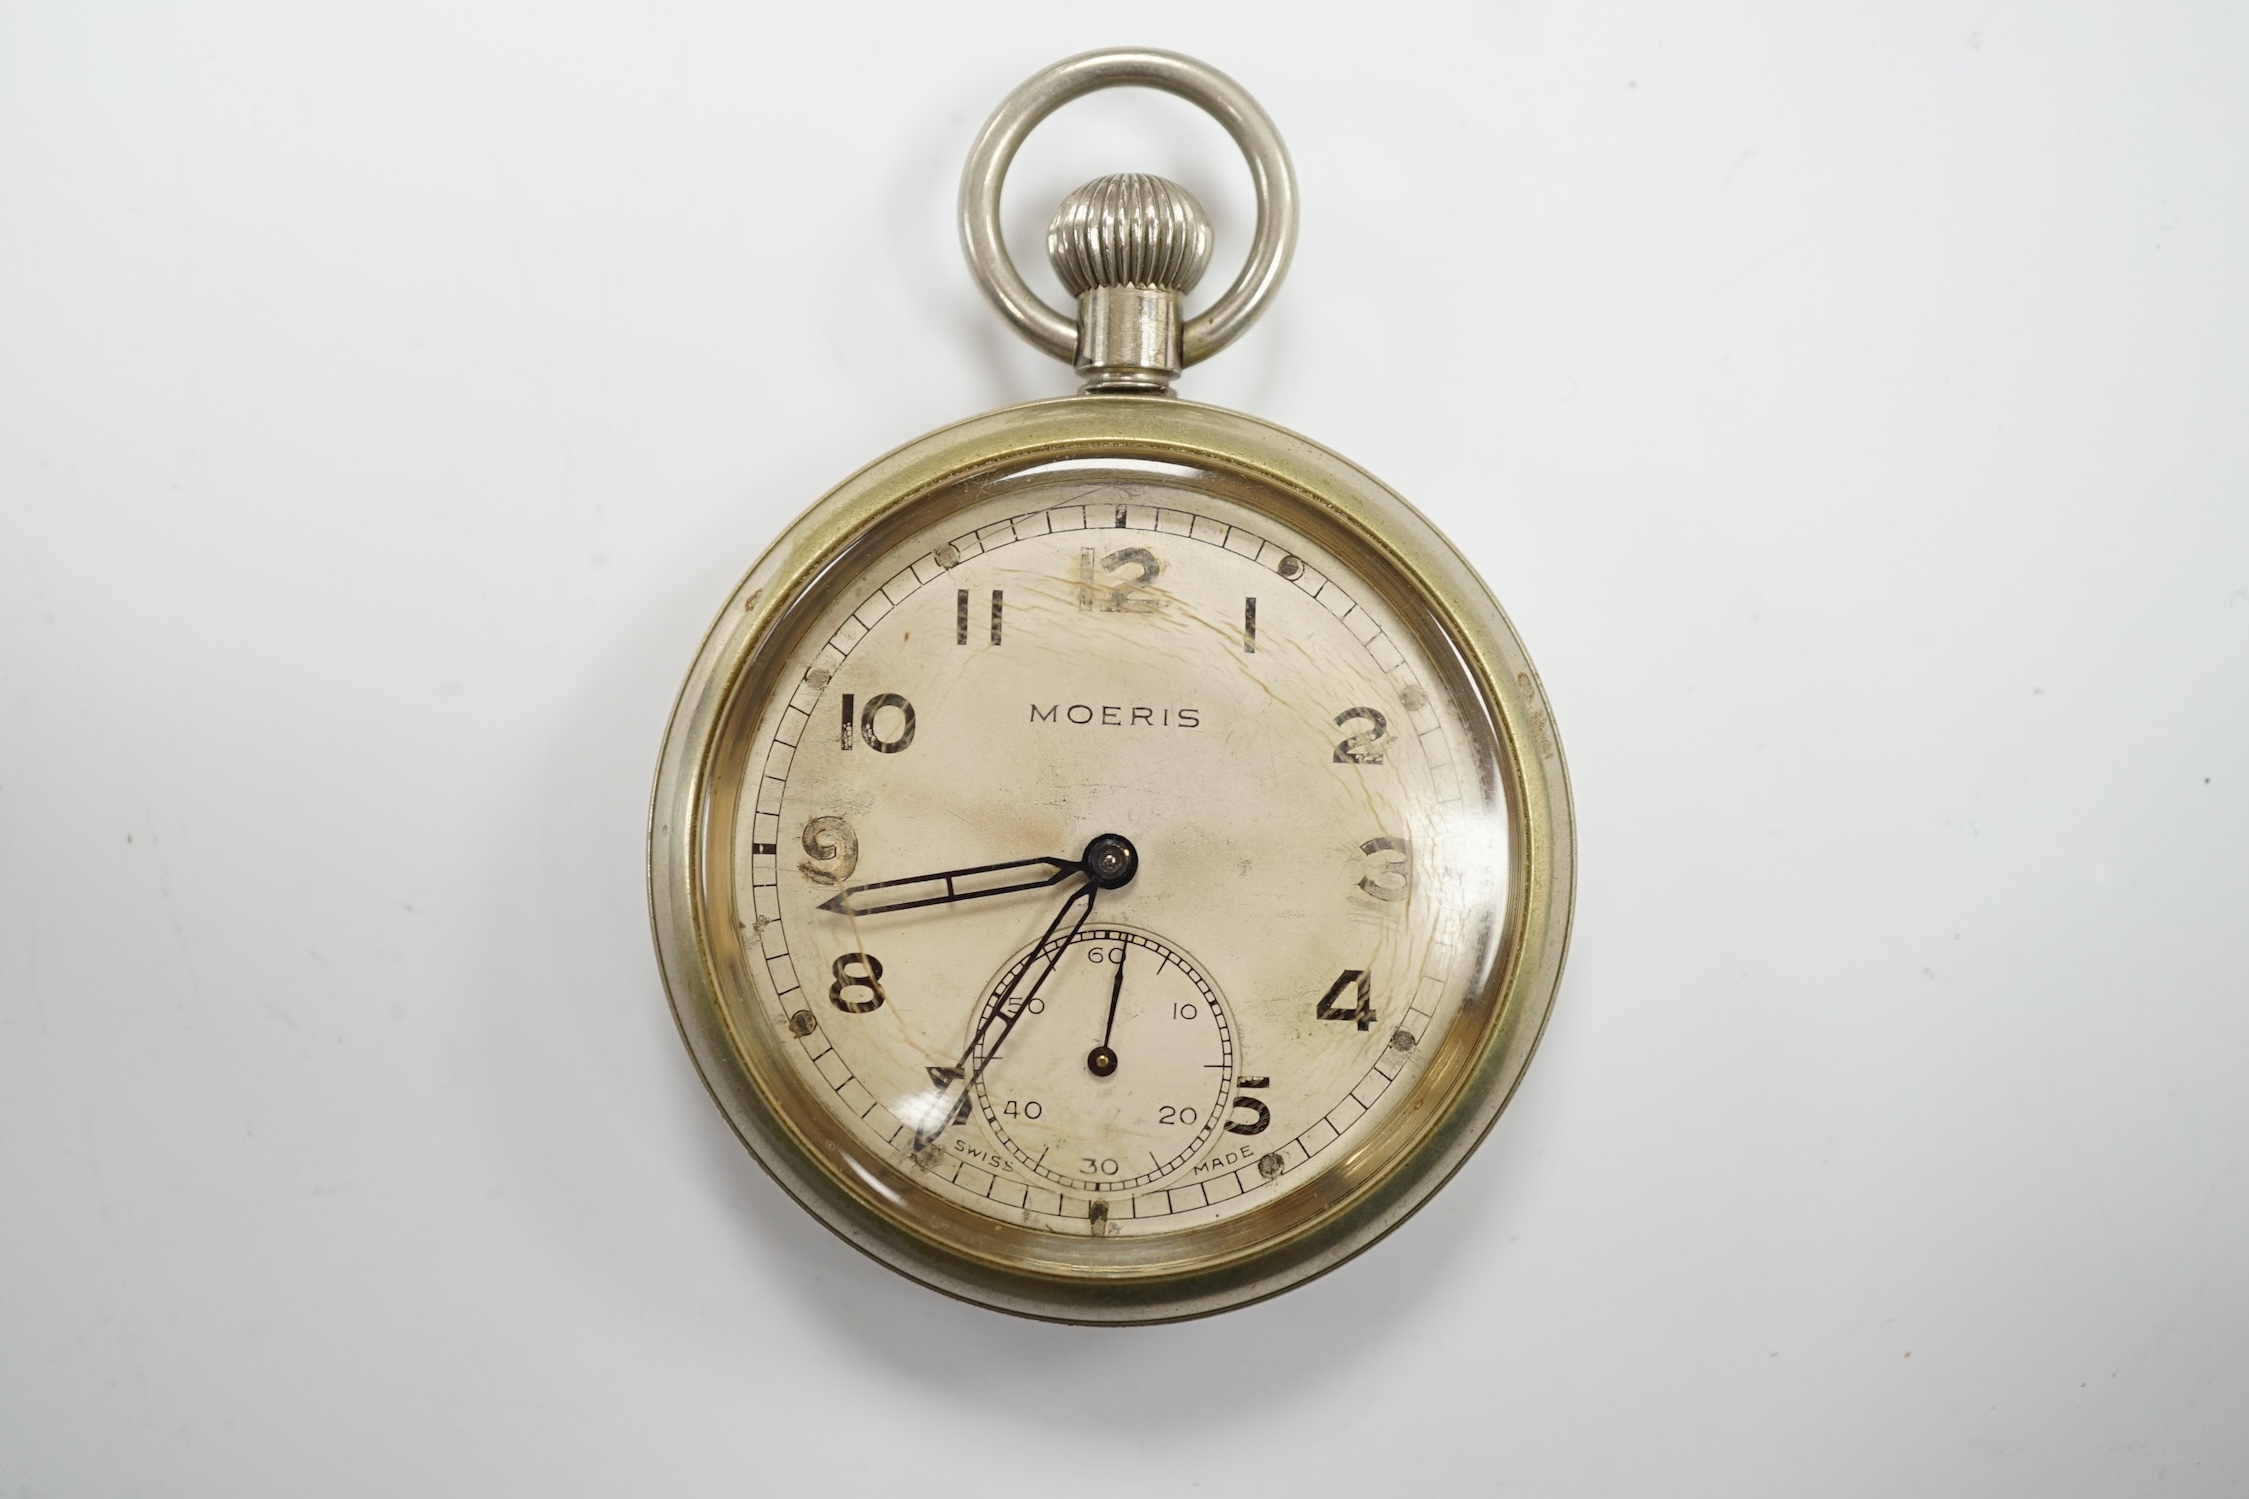 A nickel cased Moeris military G.S.T.P. (General Service Trade Pattern) open face pocket watch, with Arabic dial and subsidiary seconds, case diameter 50mm.